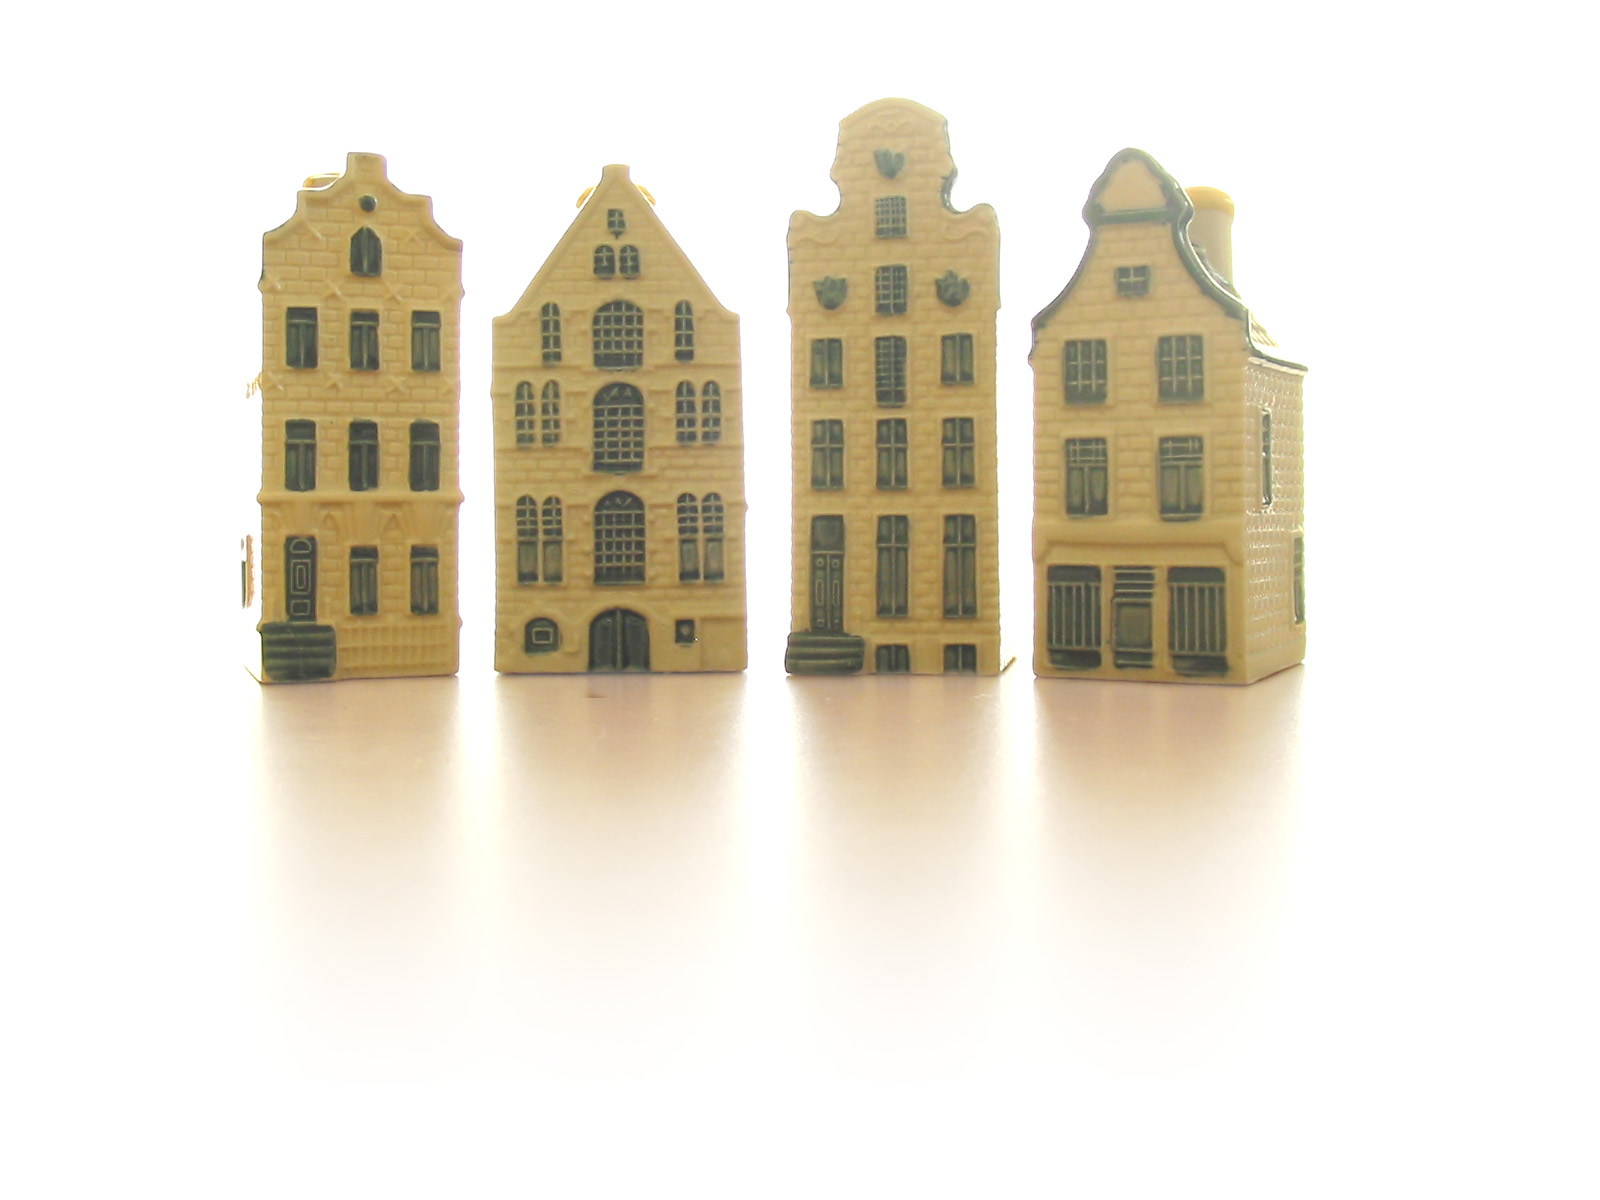 Replica, miniature blocks of flats in England and Wales made out of porcelain